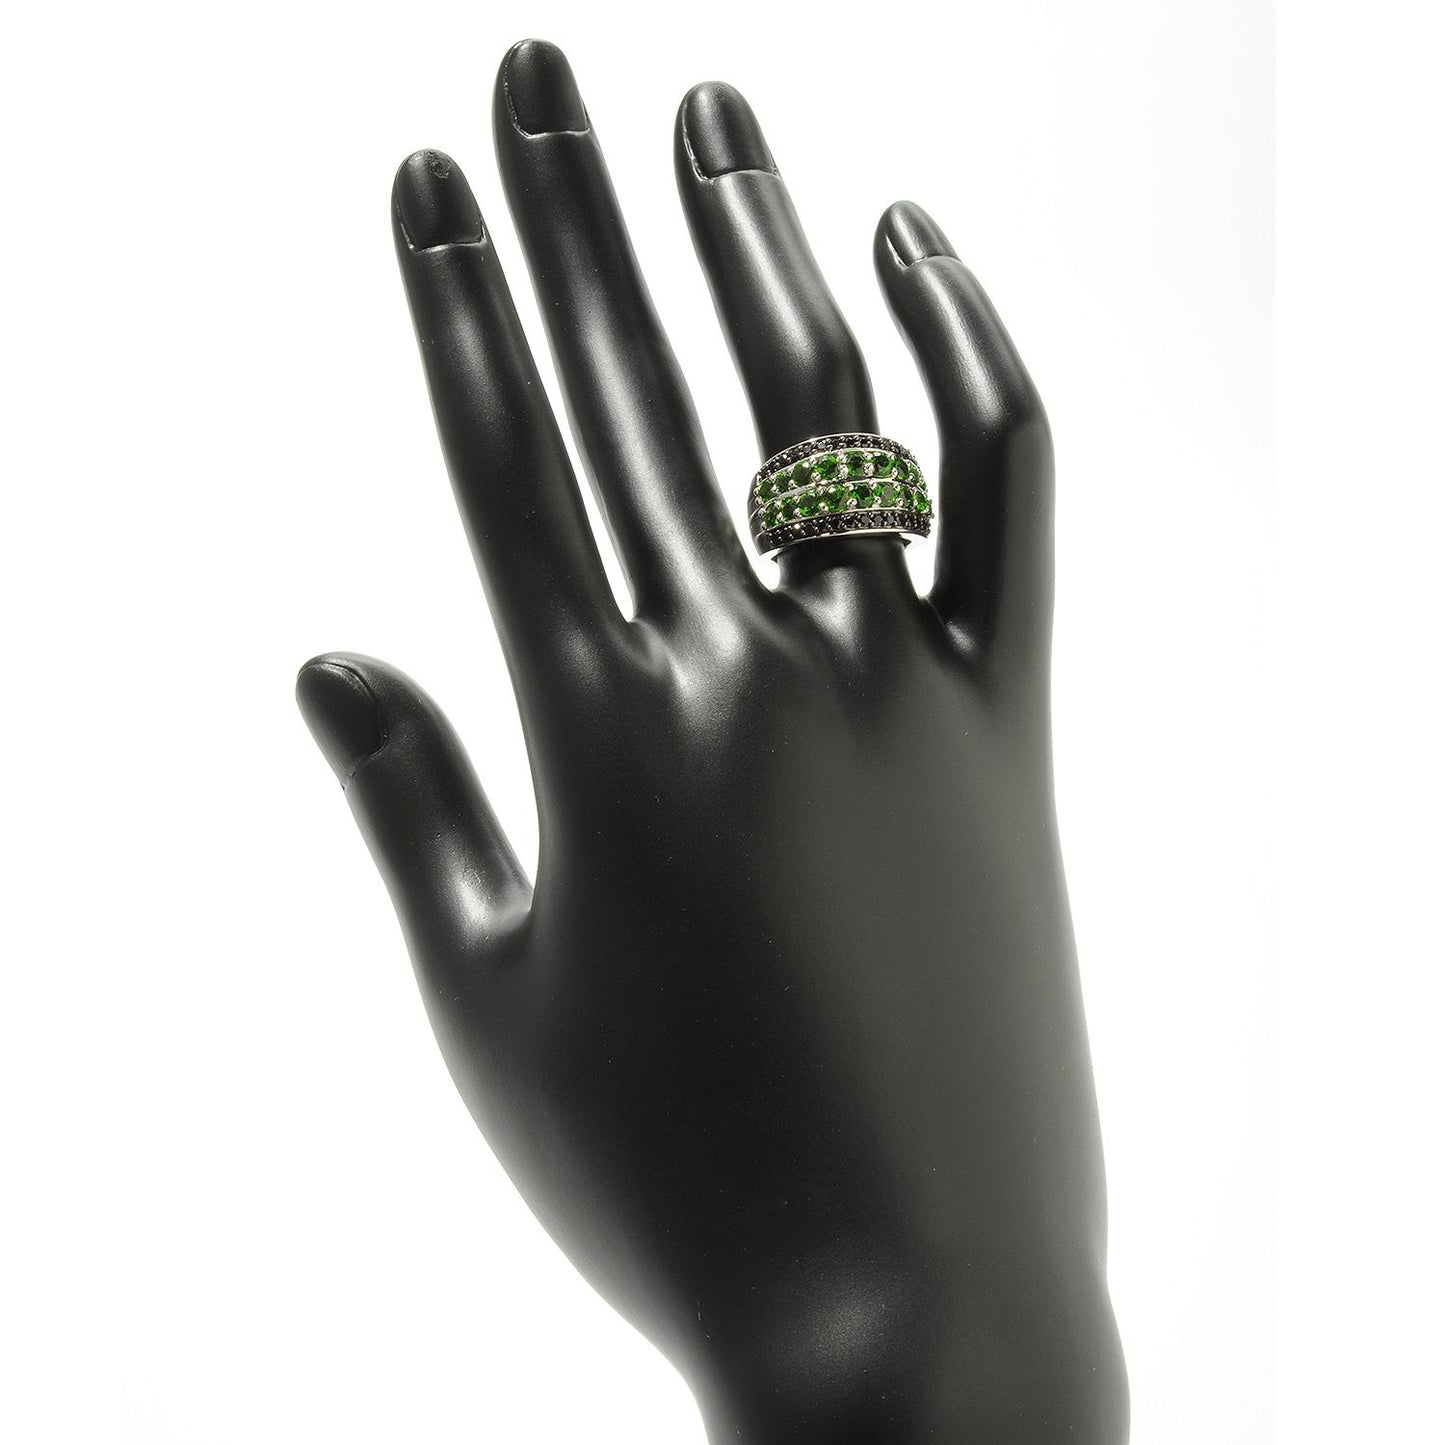 Pinctore Sterling Silver 2.52Ctw Chrome Diopside & Black Spinel Broad Band Ring